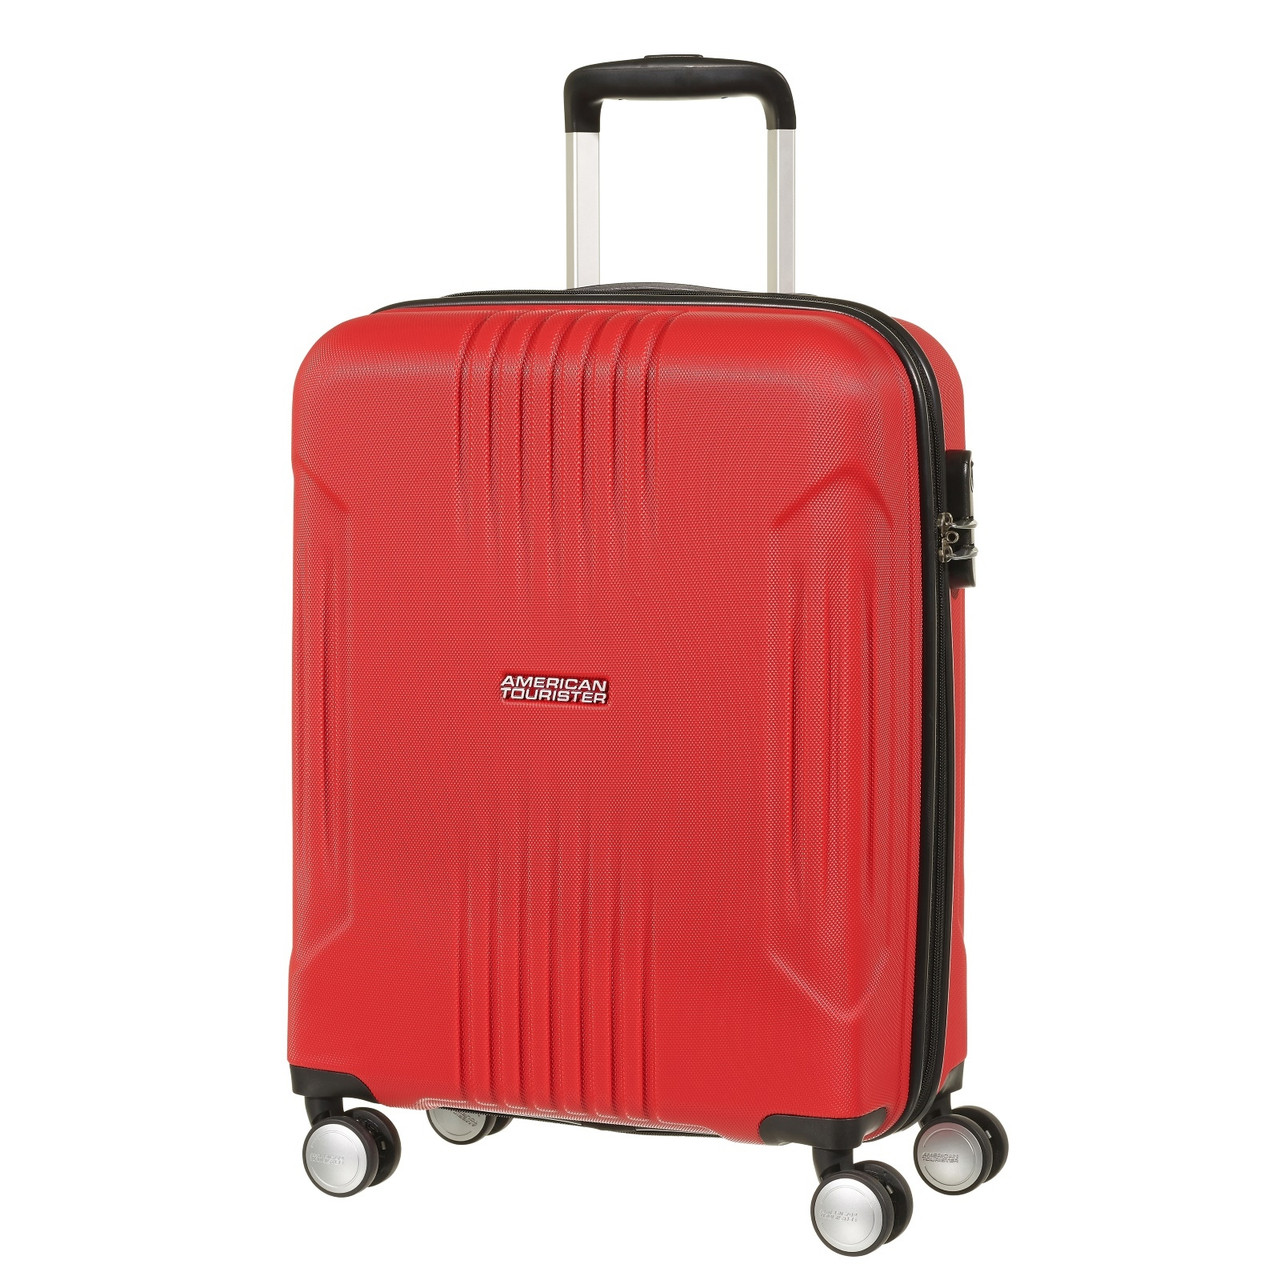 Tourister Tracklite 55cm Cabin at Luggage Superstore